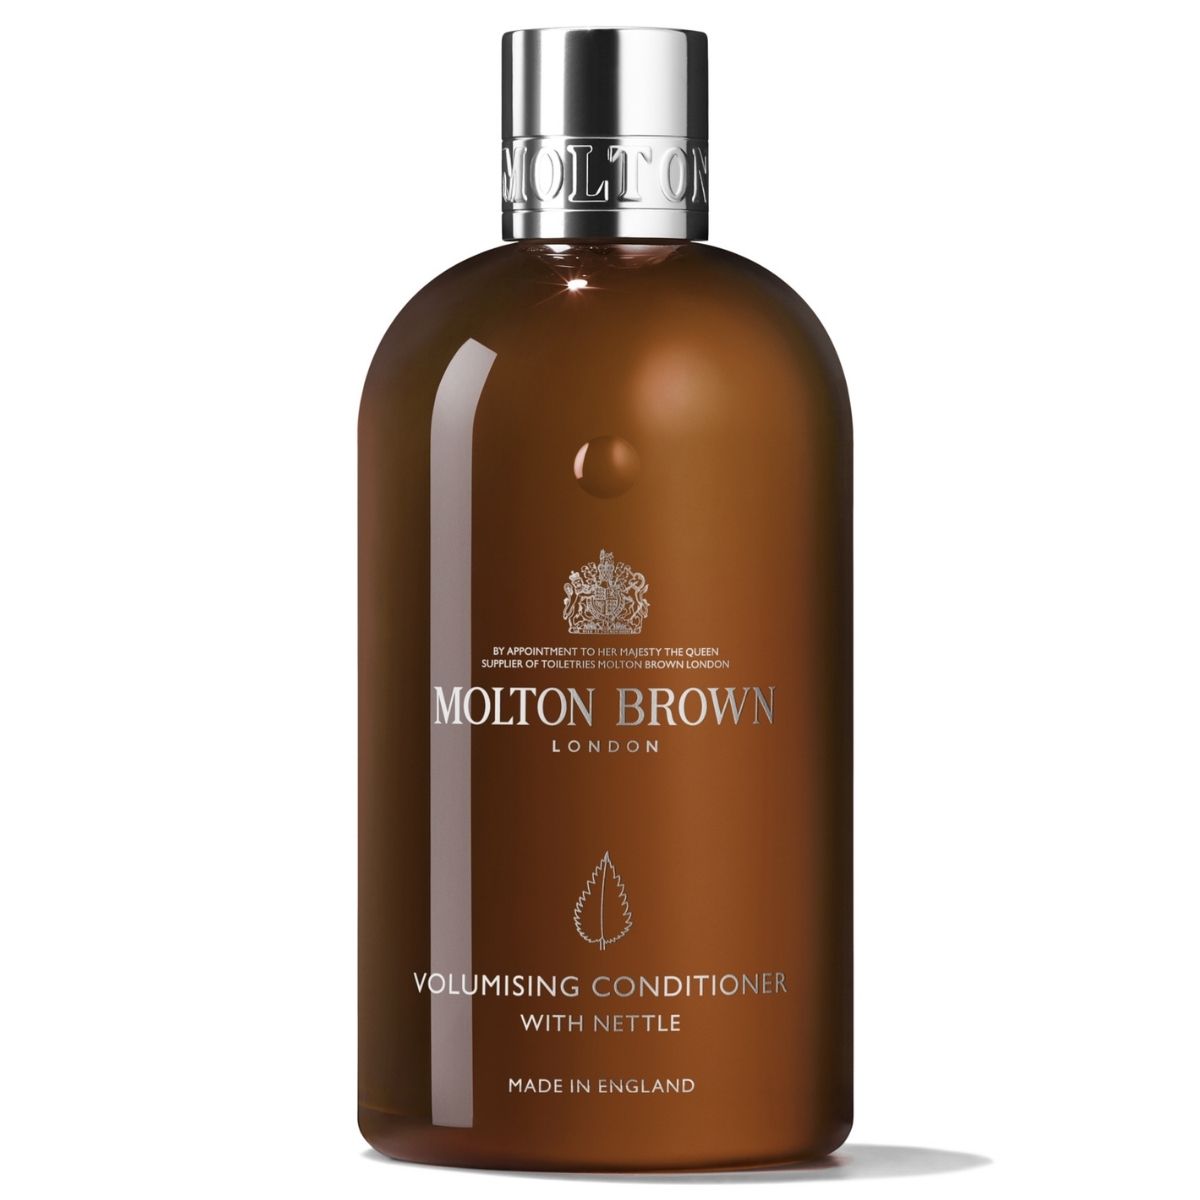 Molton Brown Volumising Conditioner With Nettle 300ml.